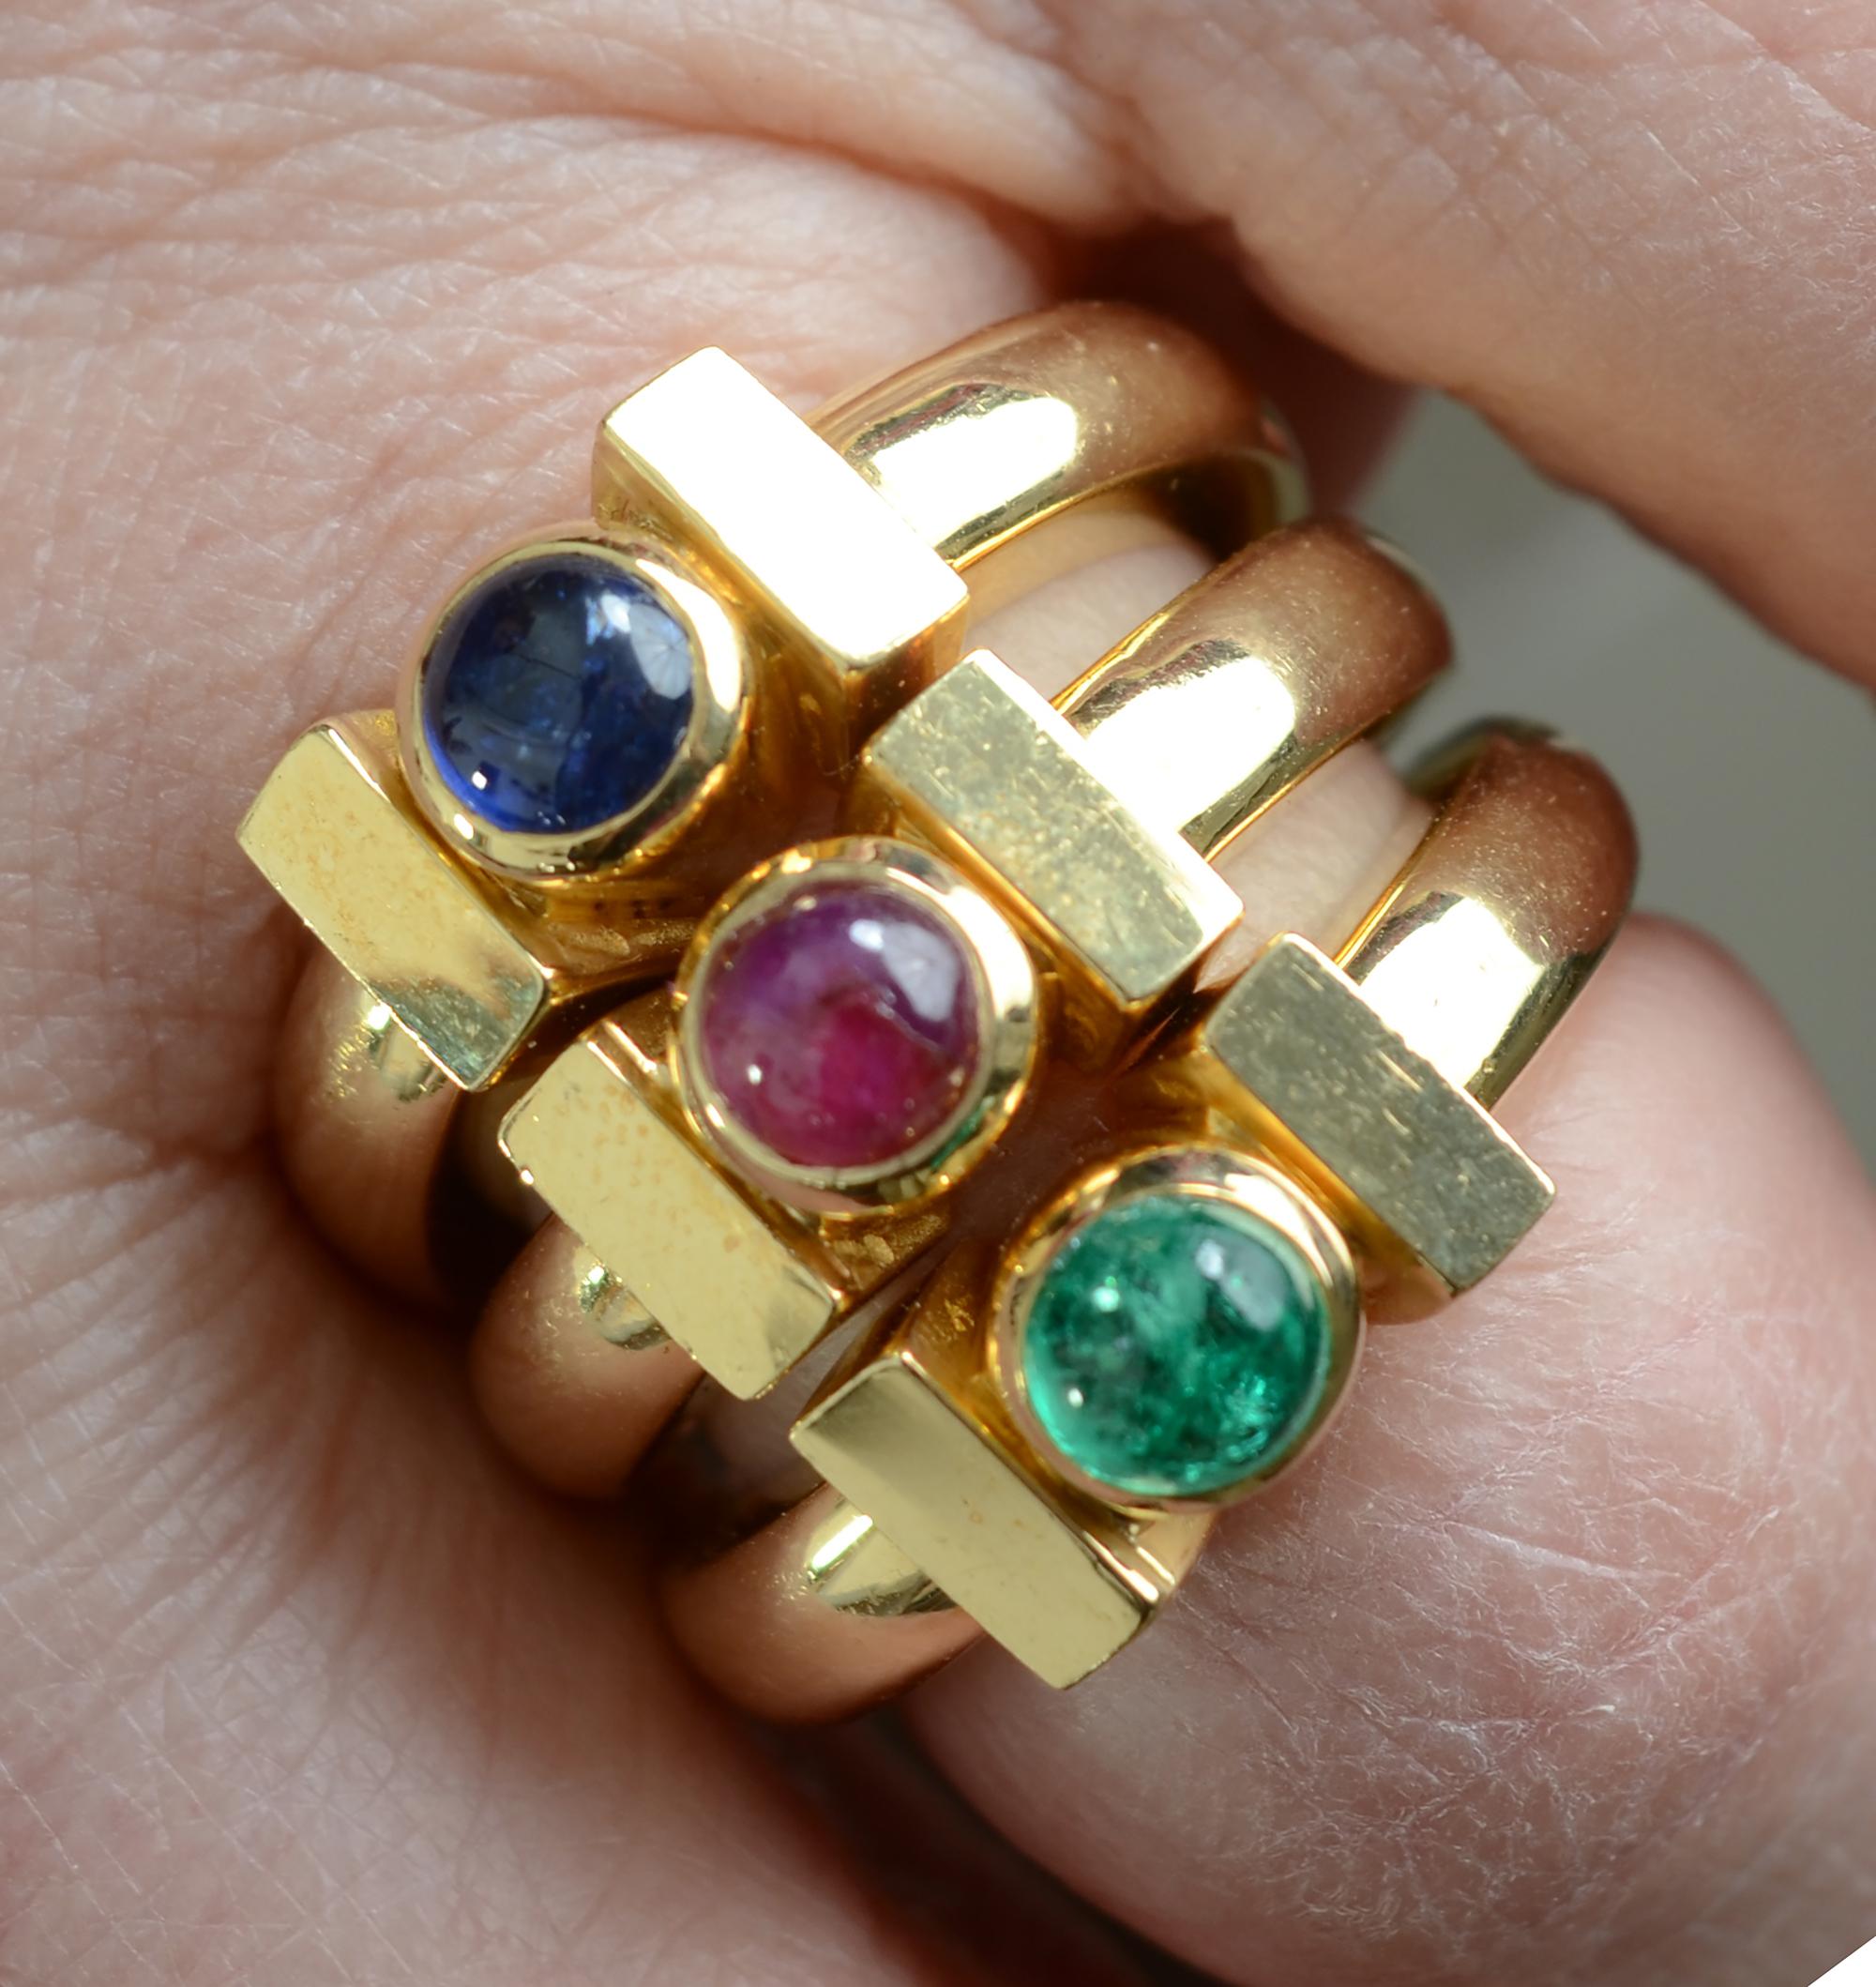 Versatile group of three solitaire rings by David Webb that can be worn singly or combined. One has a ruby; one an emerald and one a sapphire. All of the stones are cabochon cut. The rings are size six; they can be made larger or smaller.